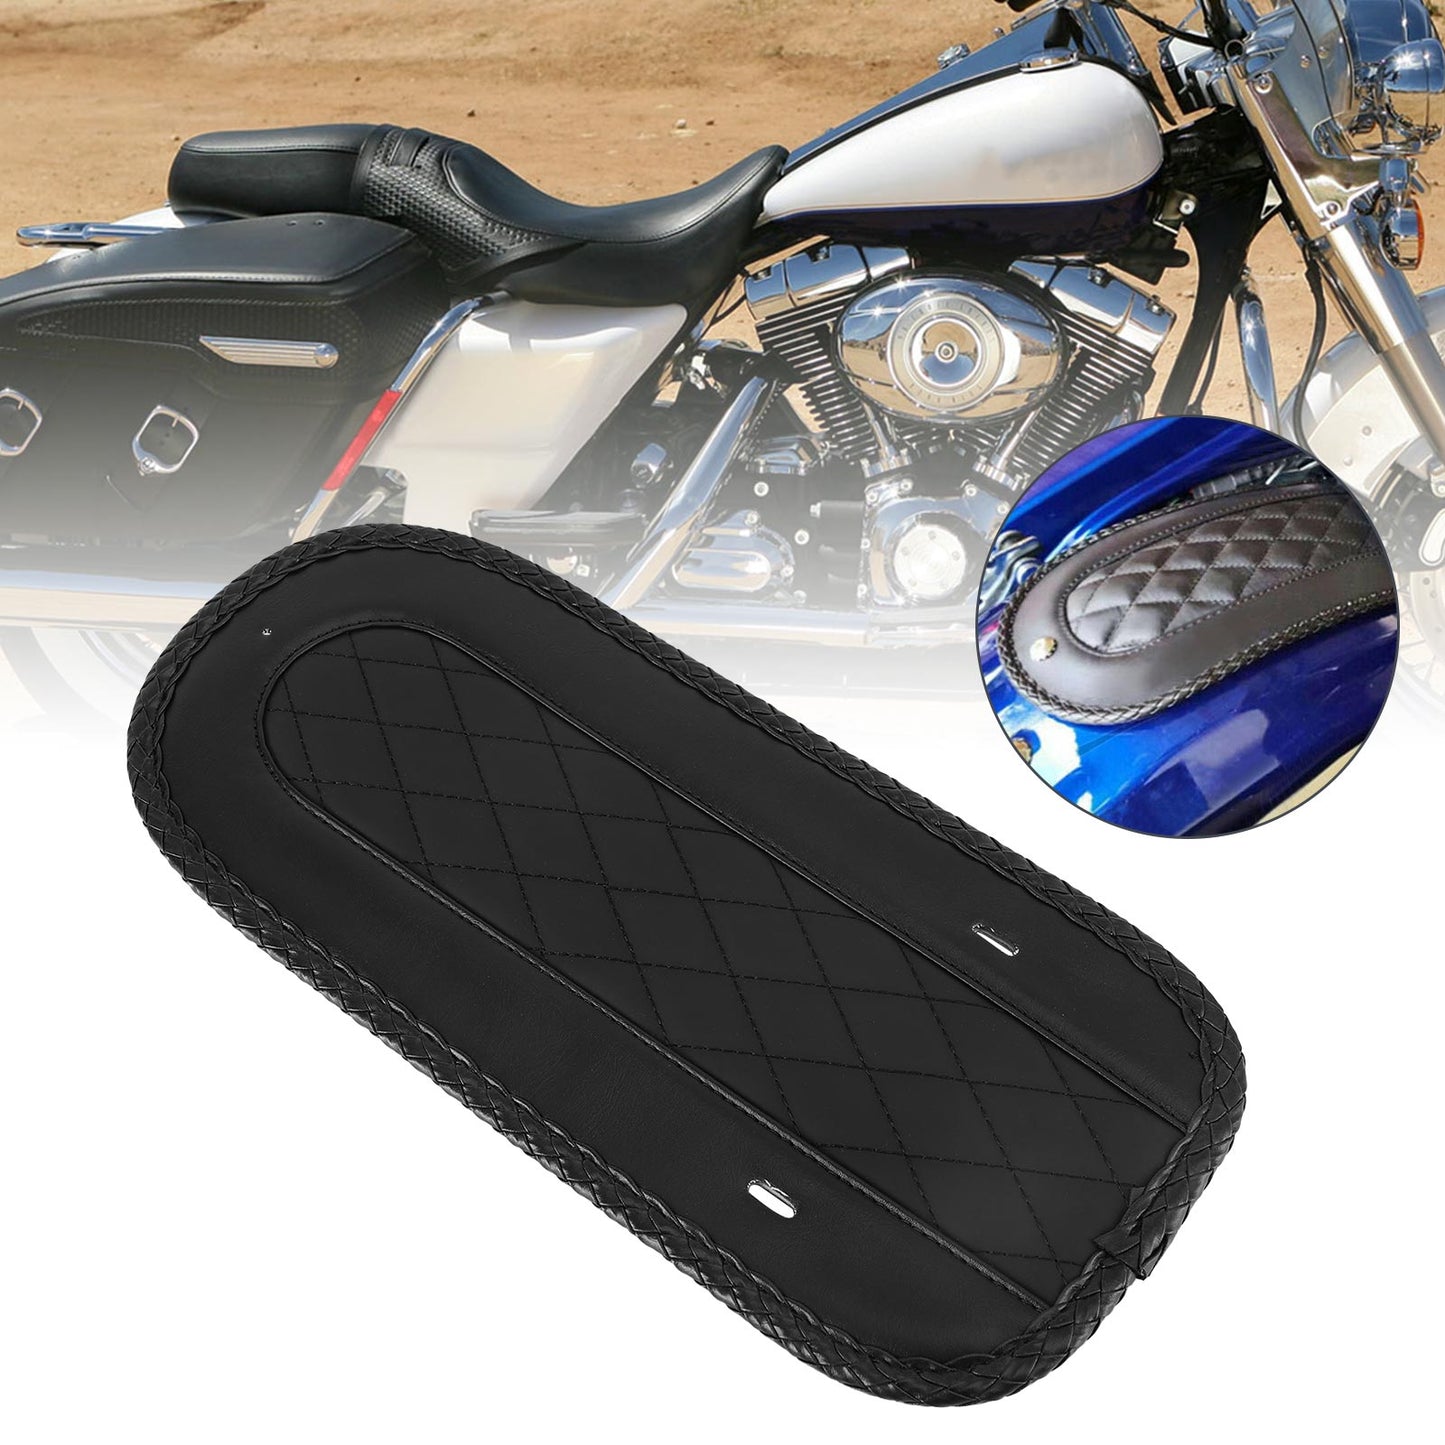 Rear Fender Bib PU Leather Solo Seat for Touring Road Glide FLHX 2008-2020